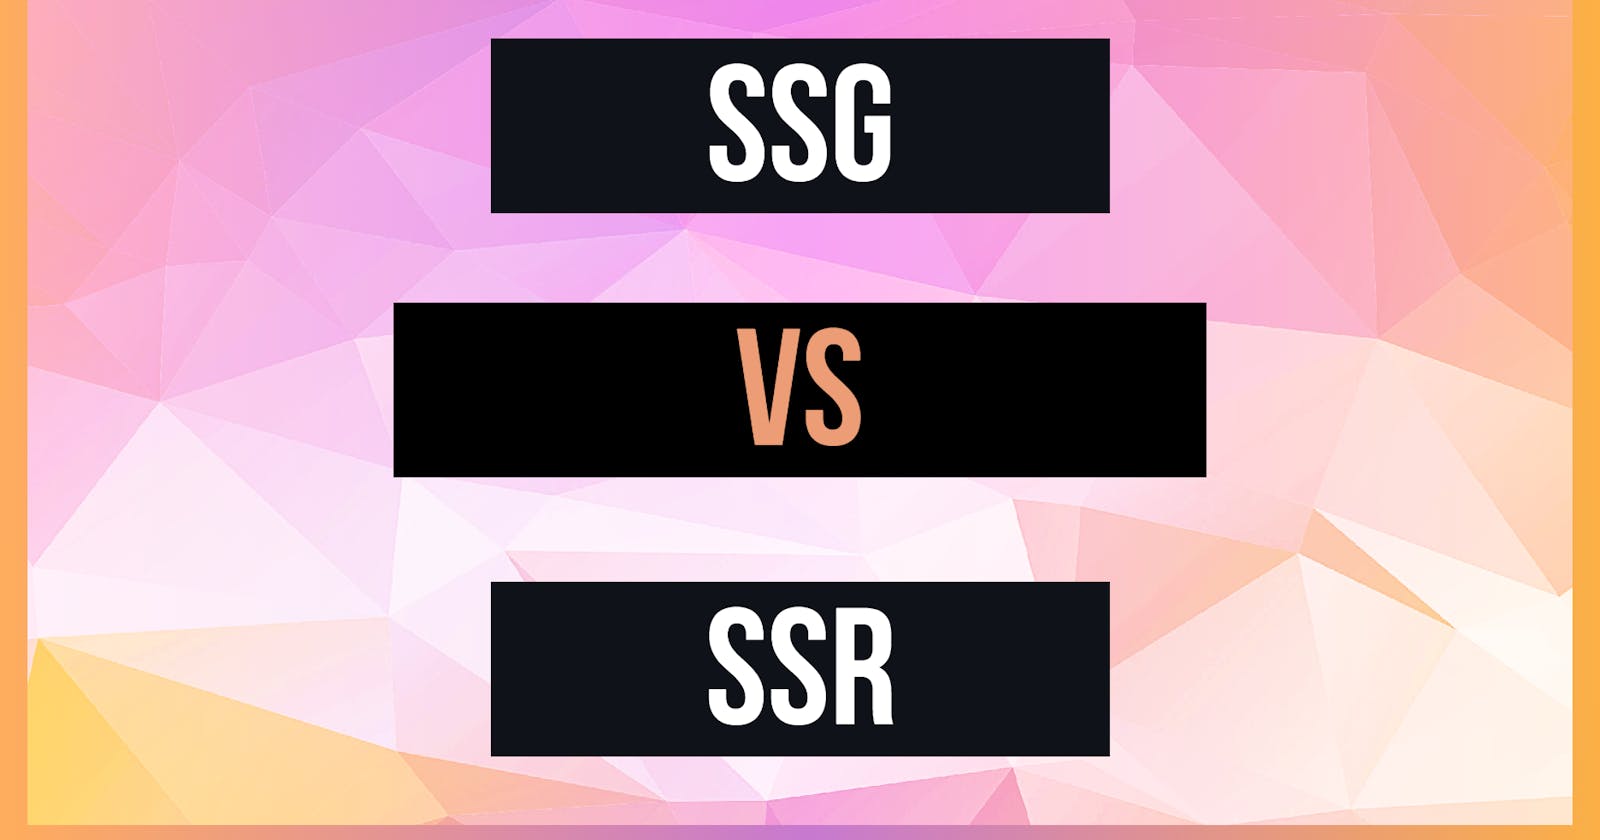 SSG VS SSR: What are they? What do they do?